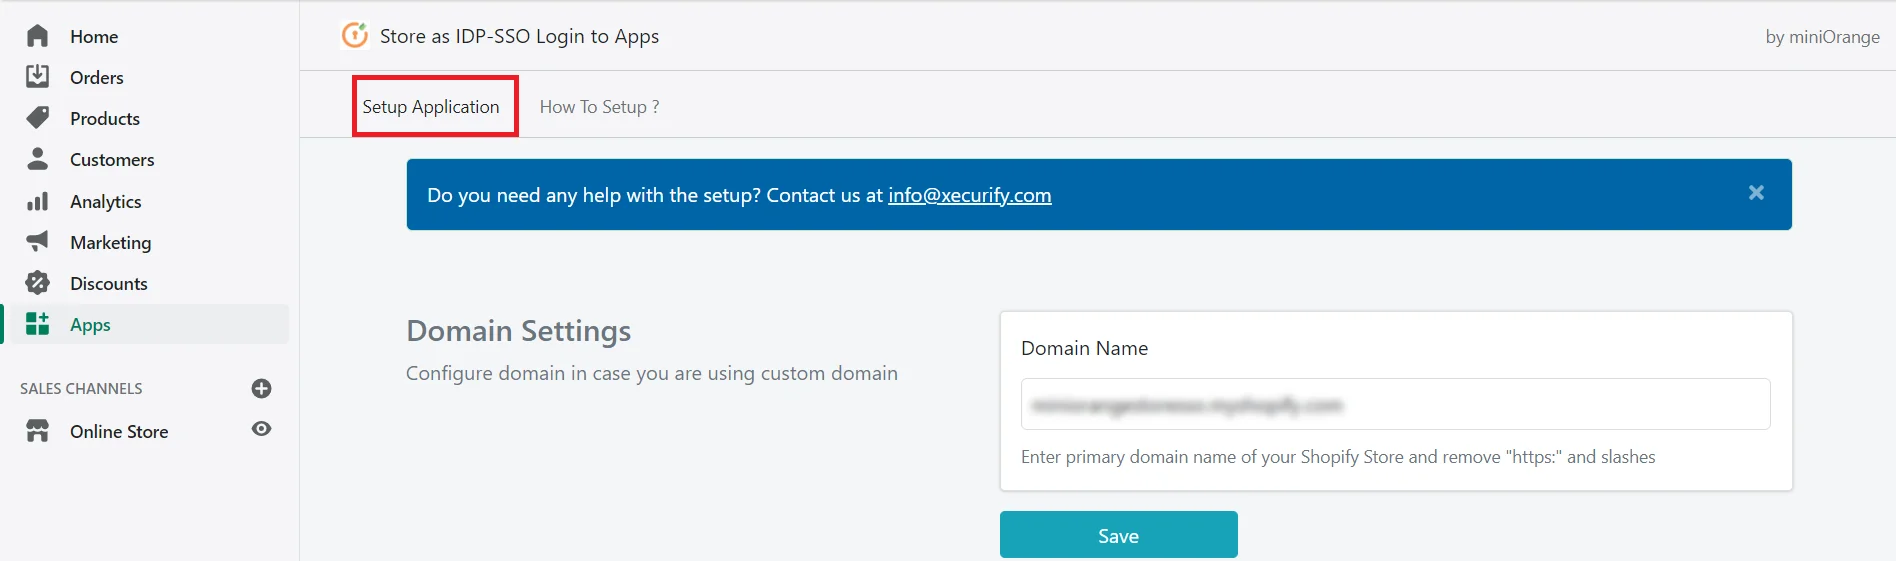 Shopify Single Sign-On (SSO) in wordpress oauth provider